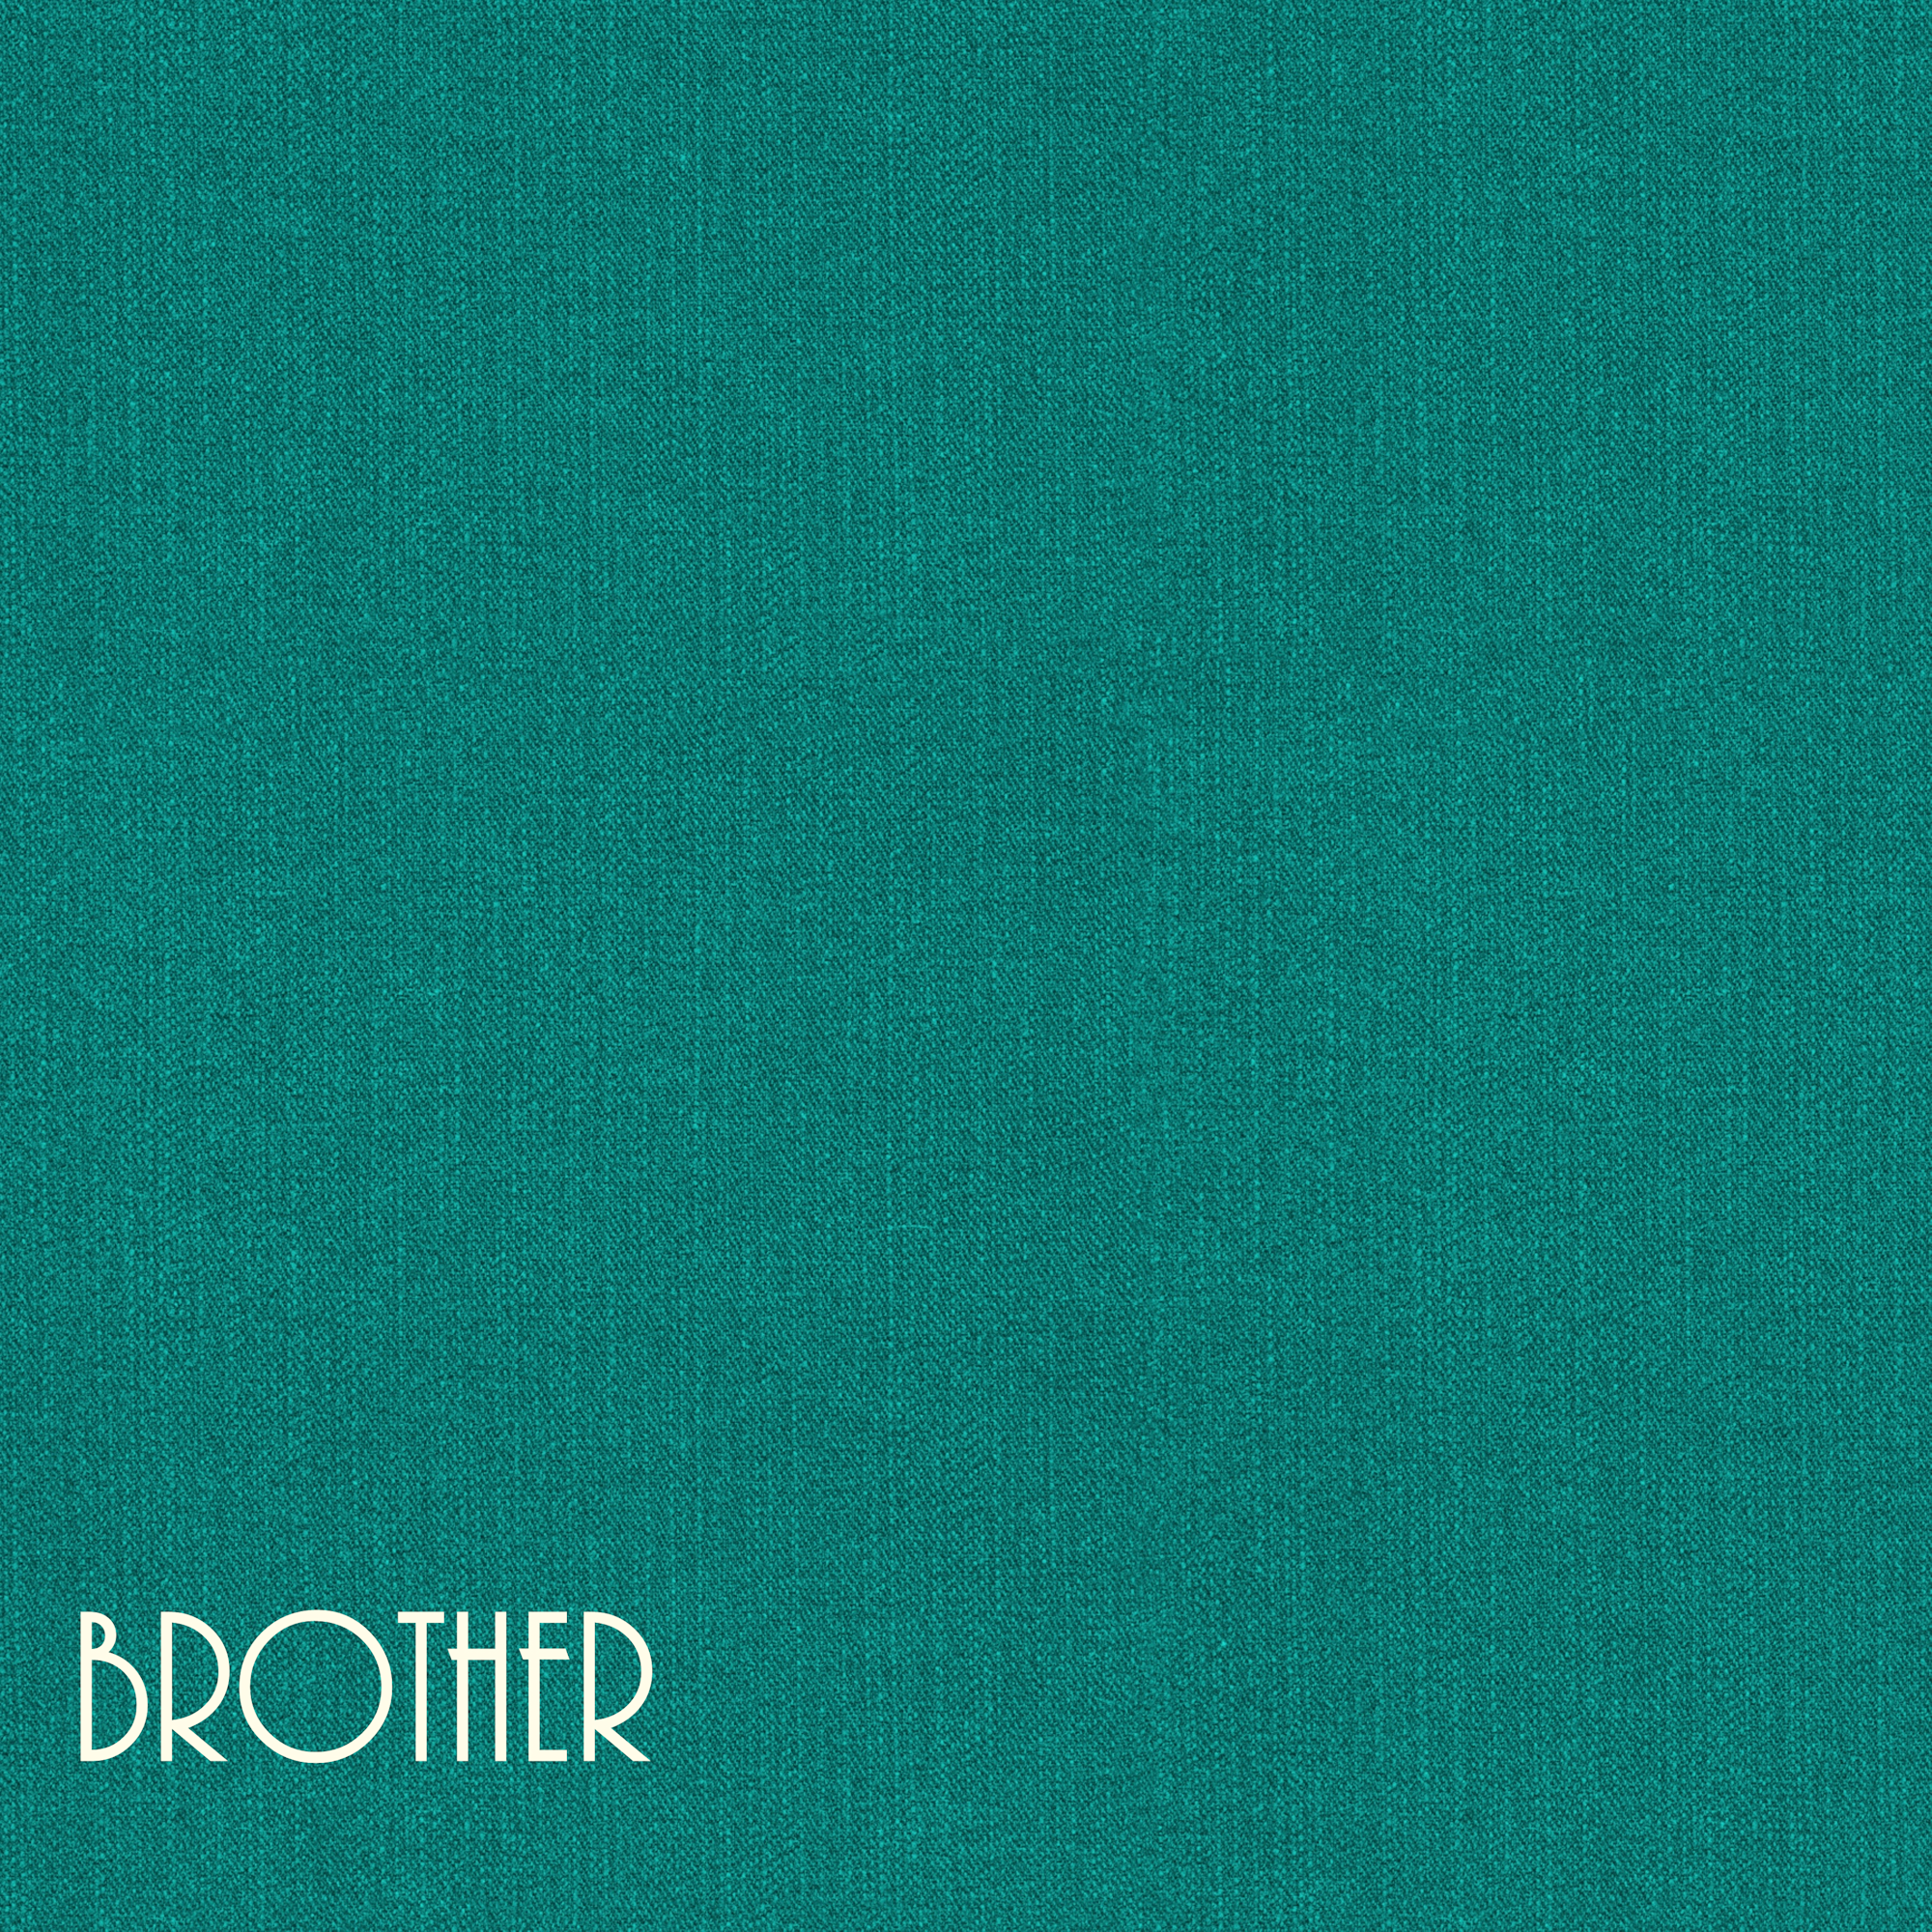 Family Collection Brother 12 x 12 Double-Sided Scrapbook Paper by SSC Designs